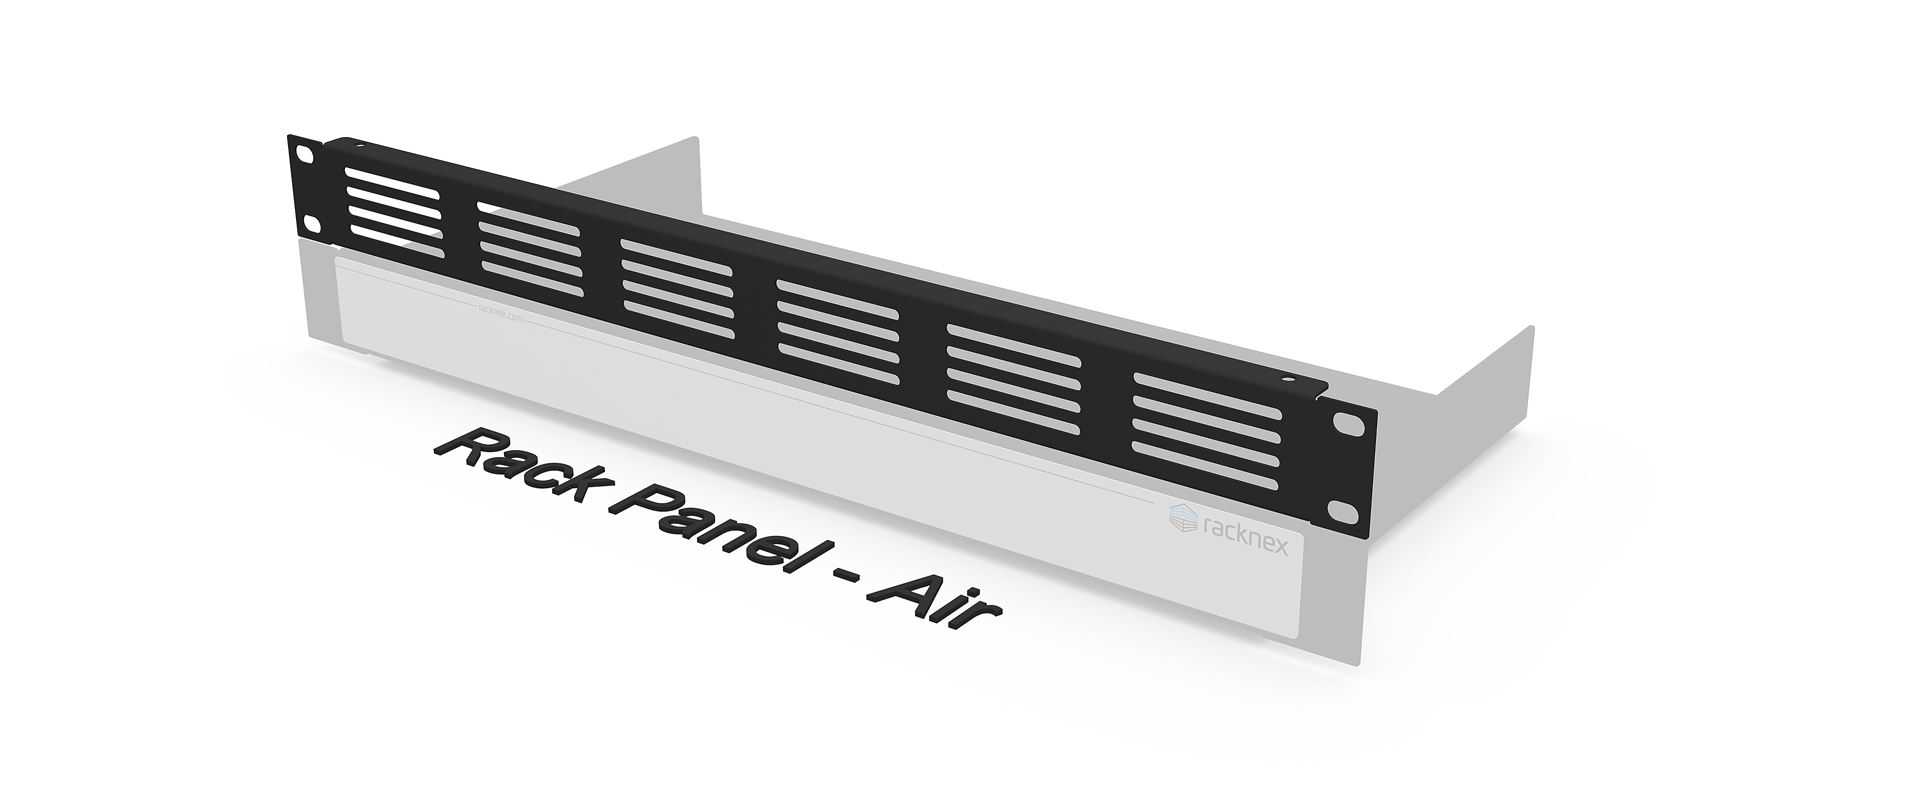 with Rack Panel Air (zr-frv-004)